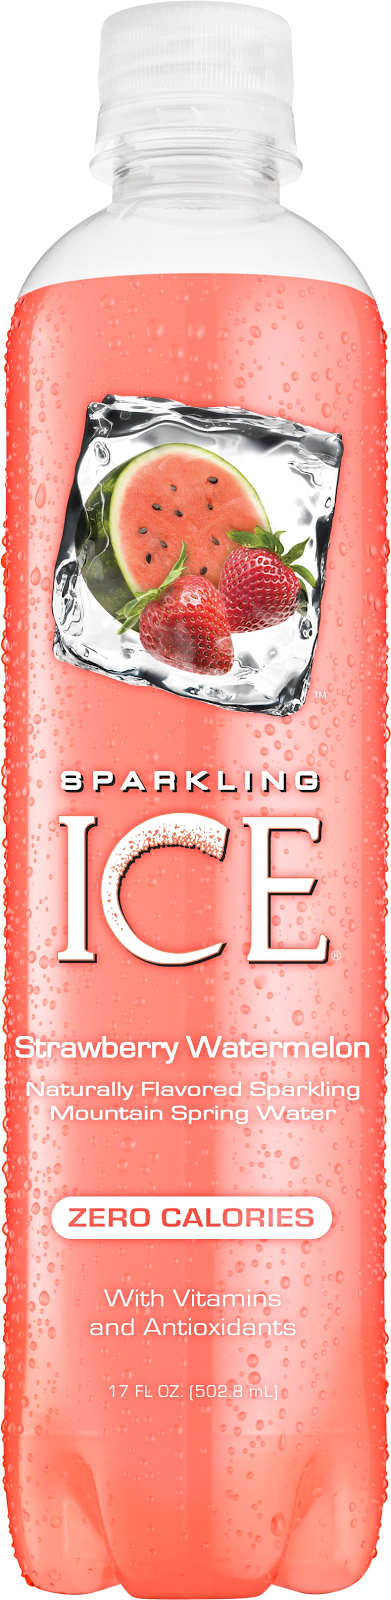 Sparkling ICE Launches 2 New Bold Flavors